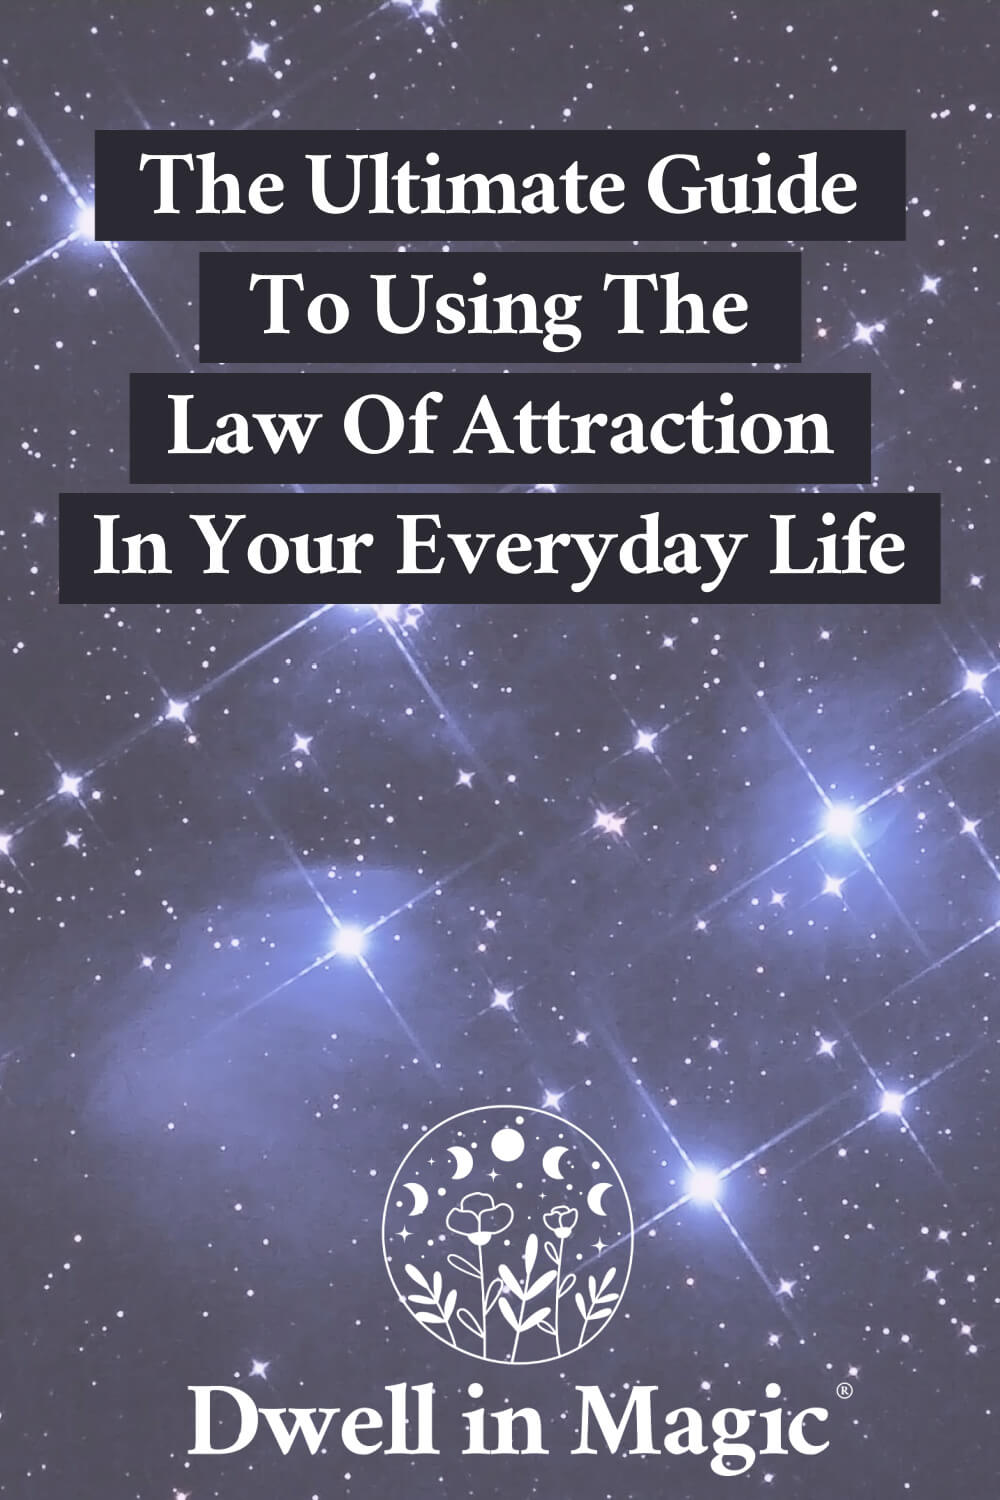 The Ultimate Guide To Using The Law Of Attraction In Your Everyday Life